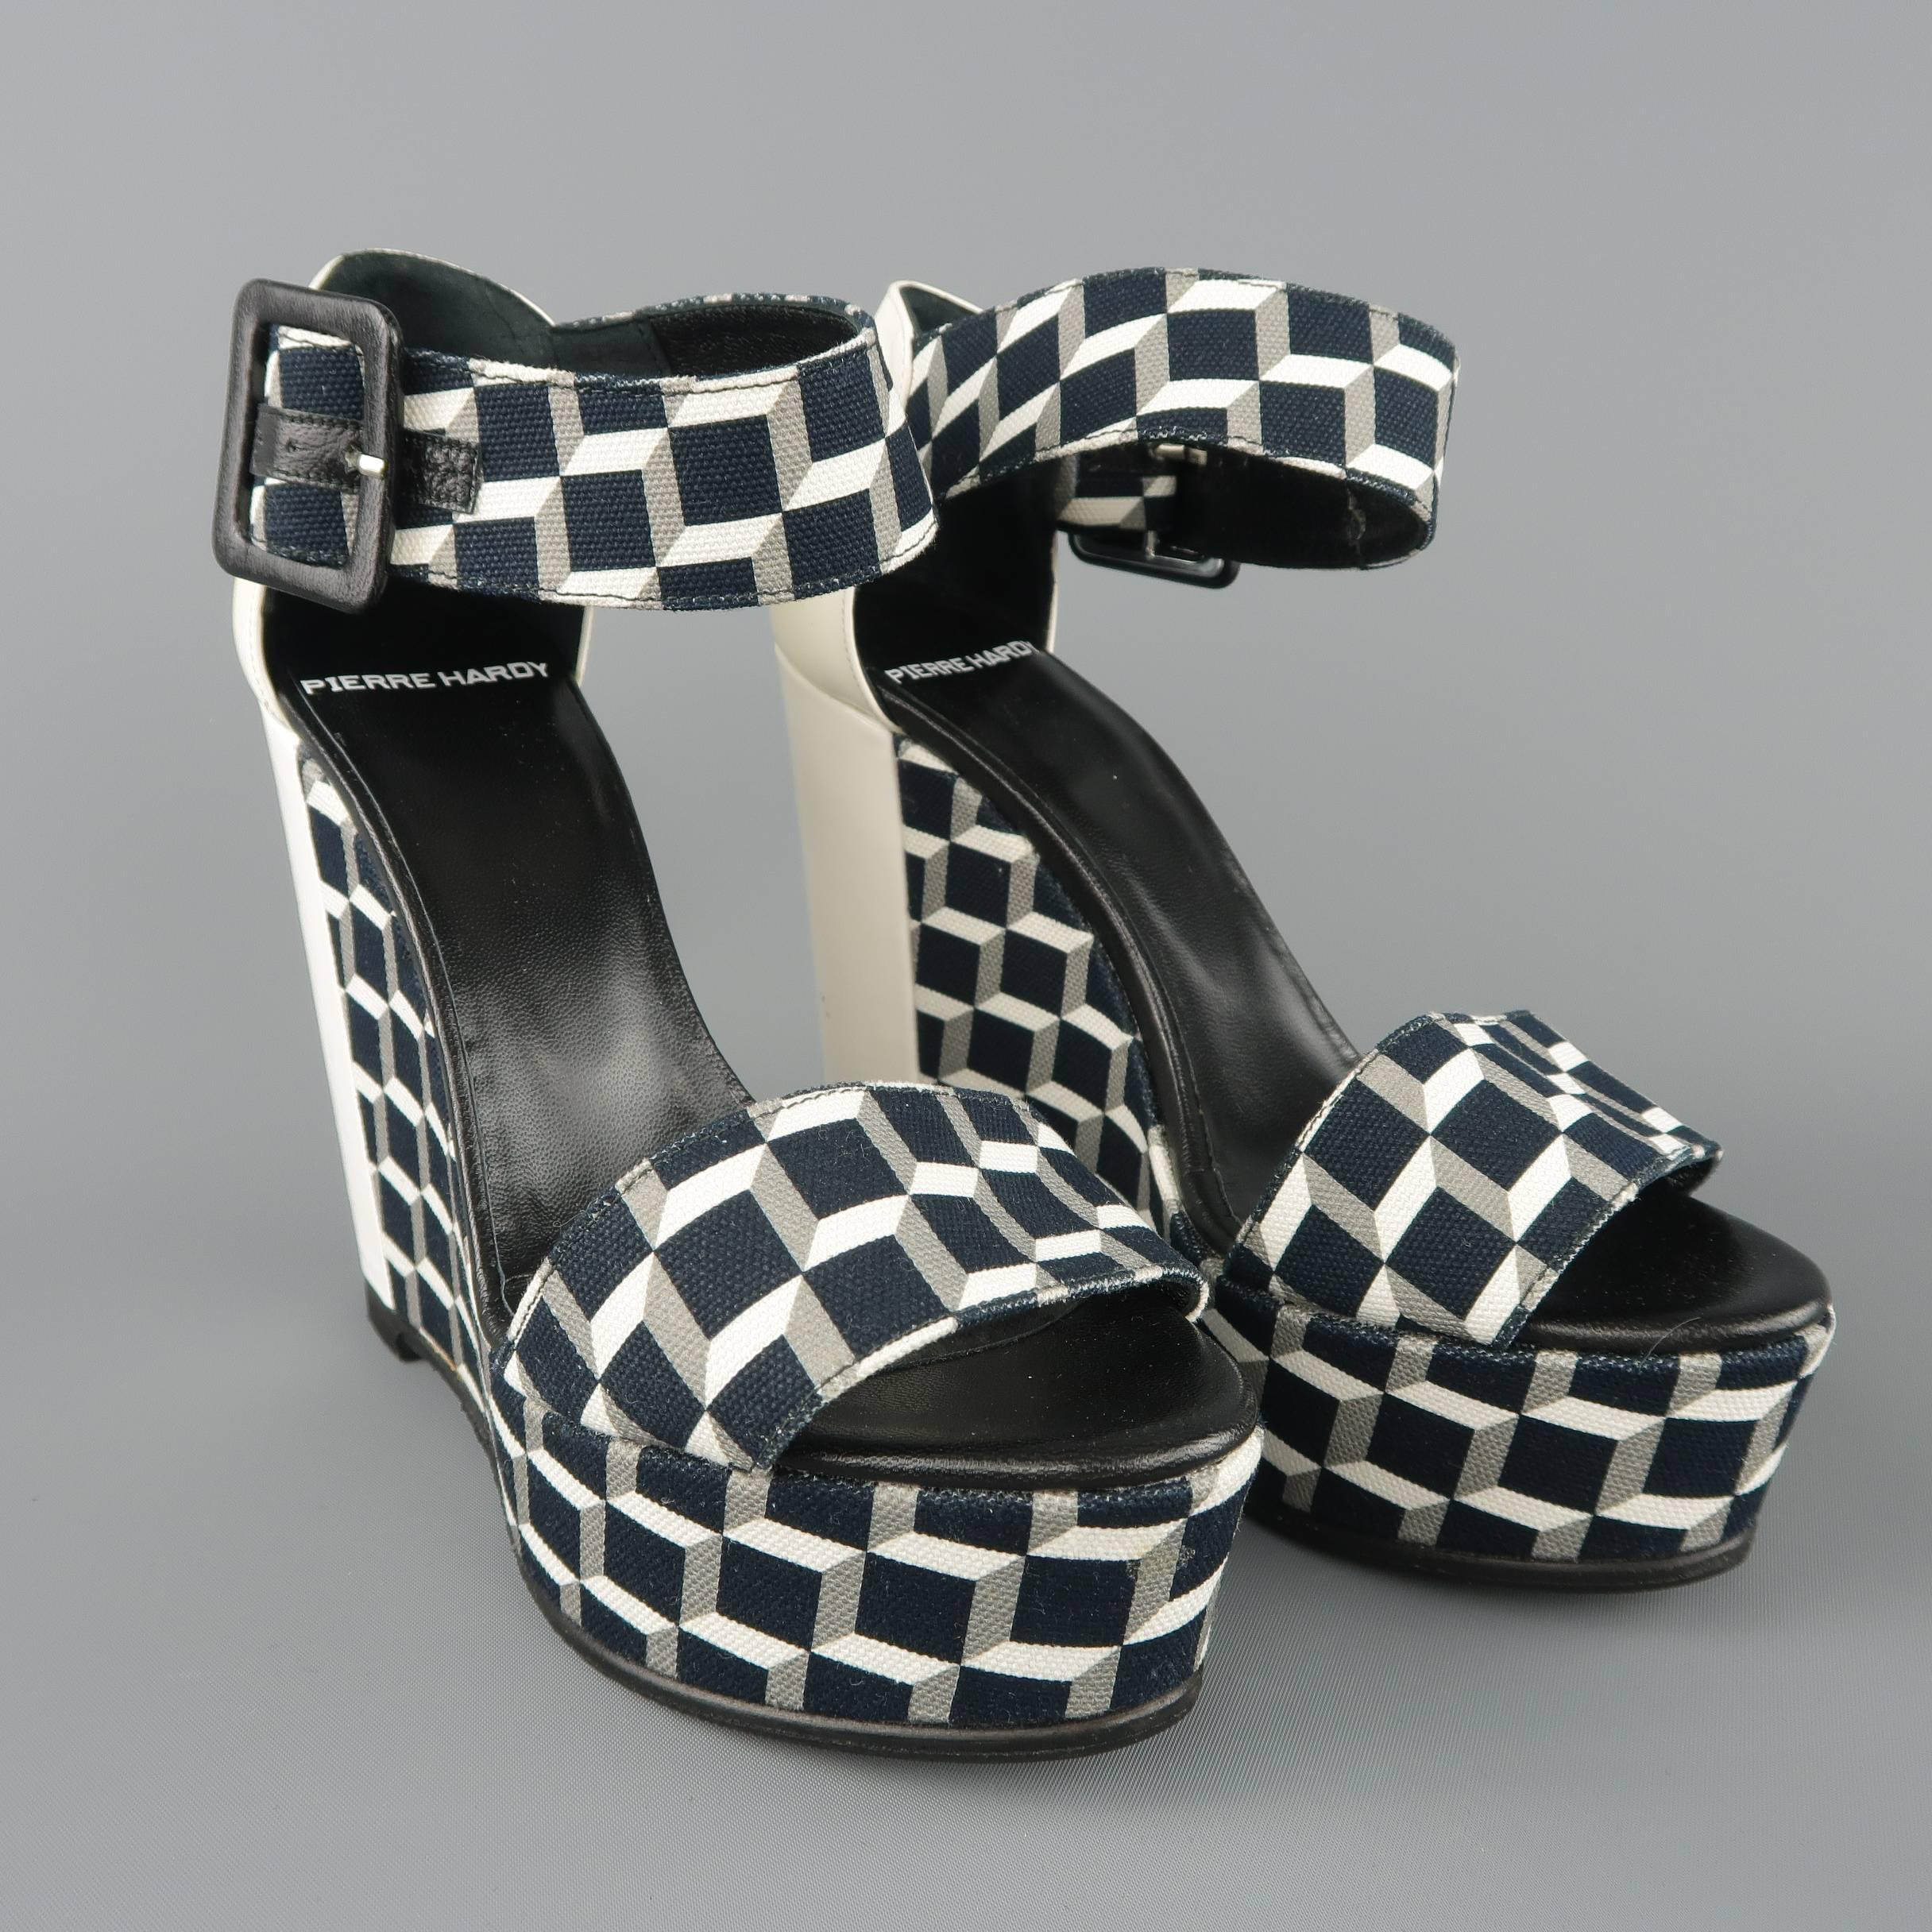 PIERRE HARDY sandals come in black and white geometric print canvas with a thick ankle strap white patent leather back panel, and covered platform wedge. White patent leather discolored. As-is.
 
Fair Pre-Owned Condition.
Marked: (no size)
